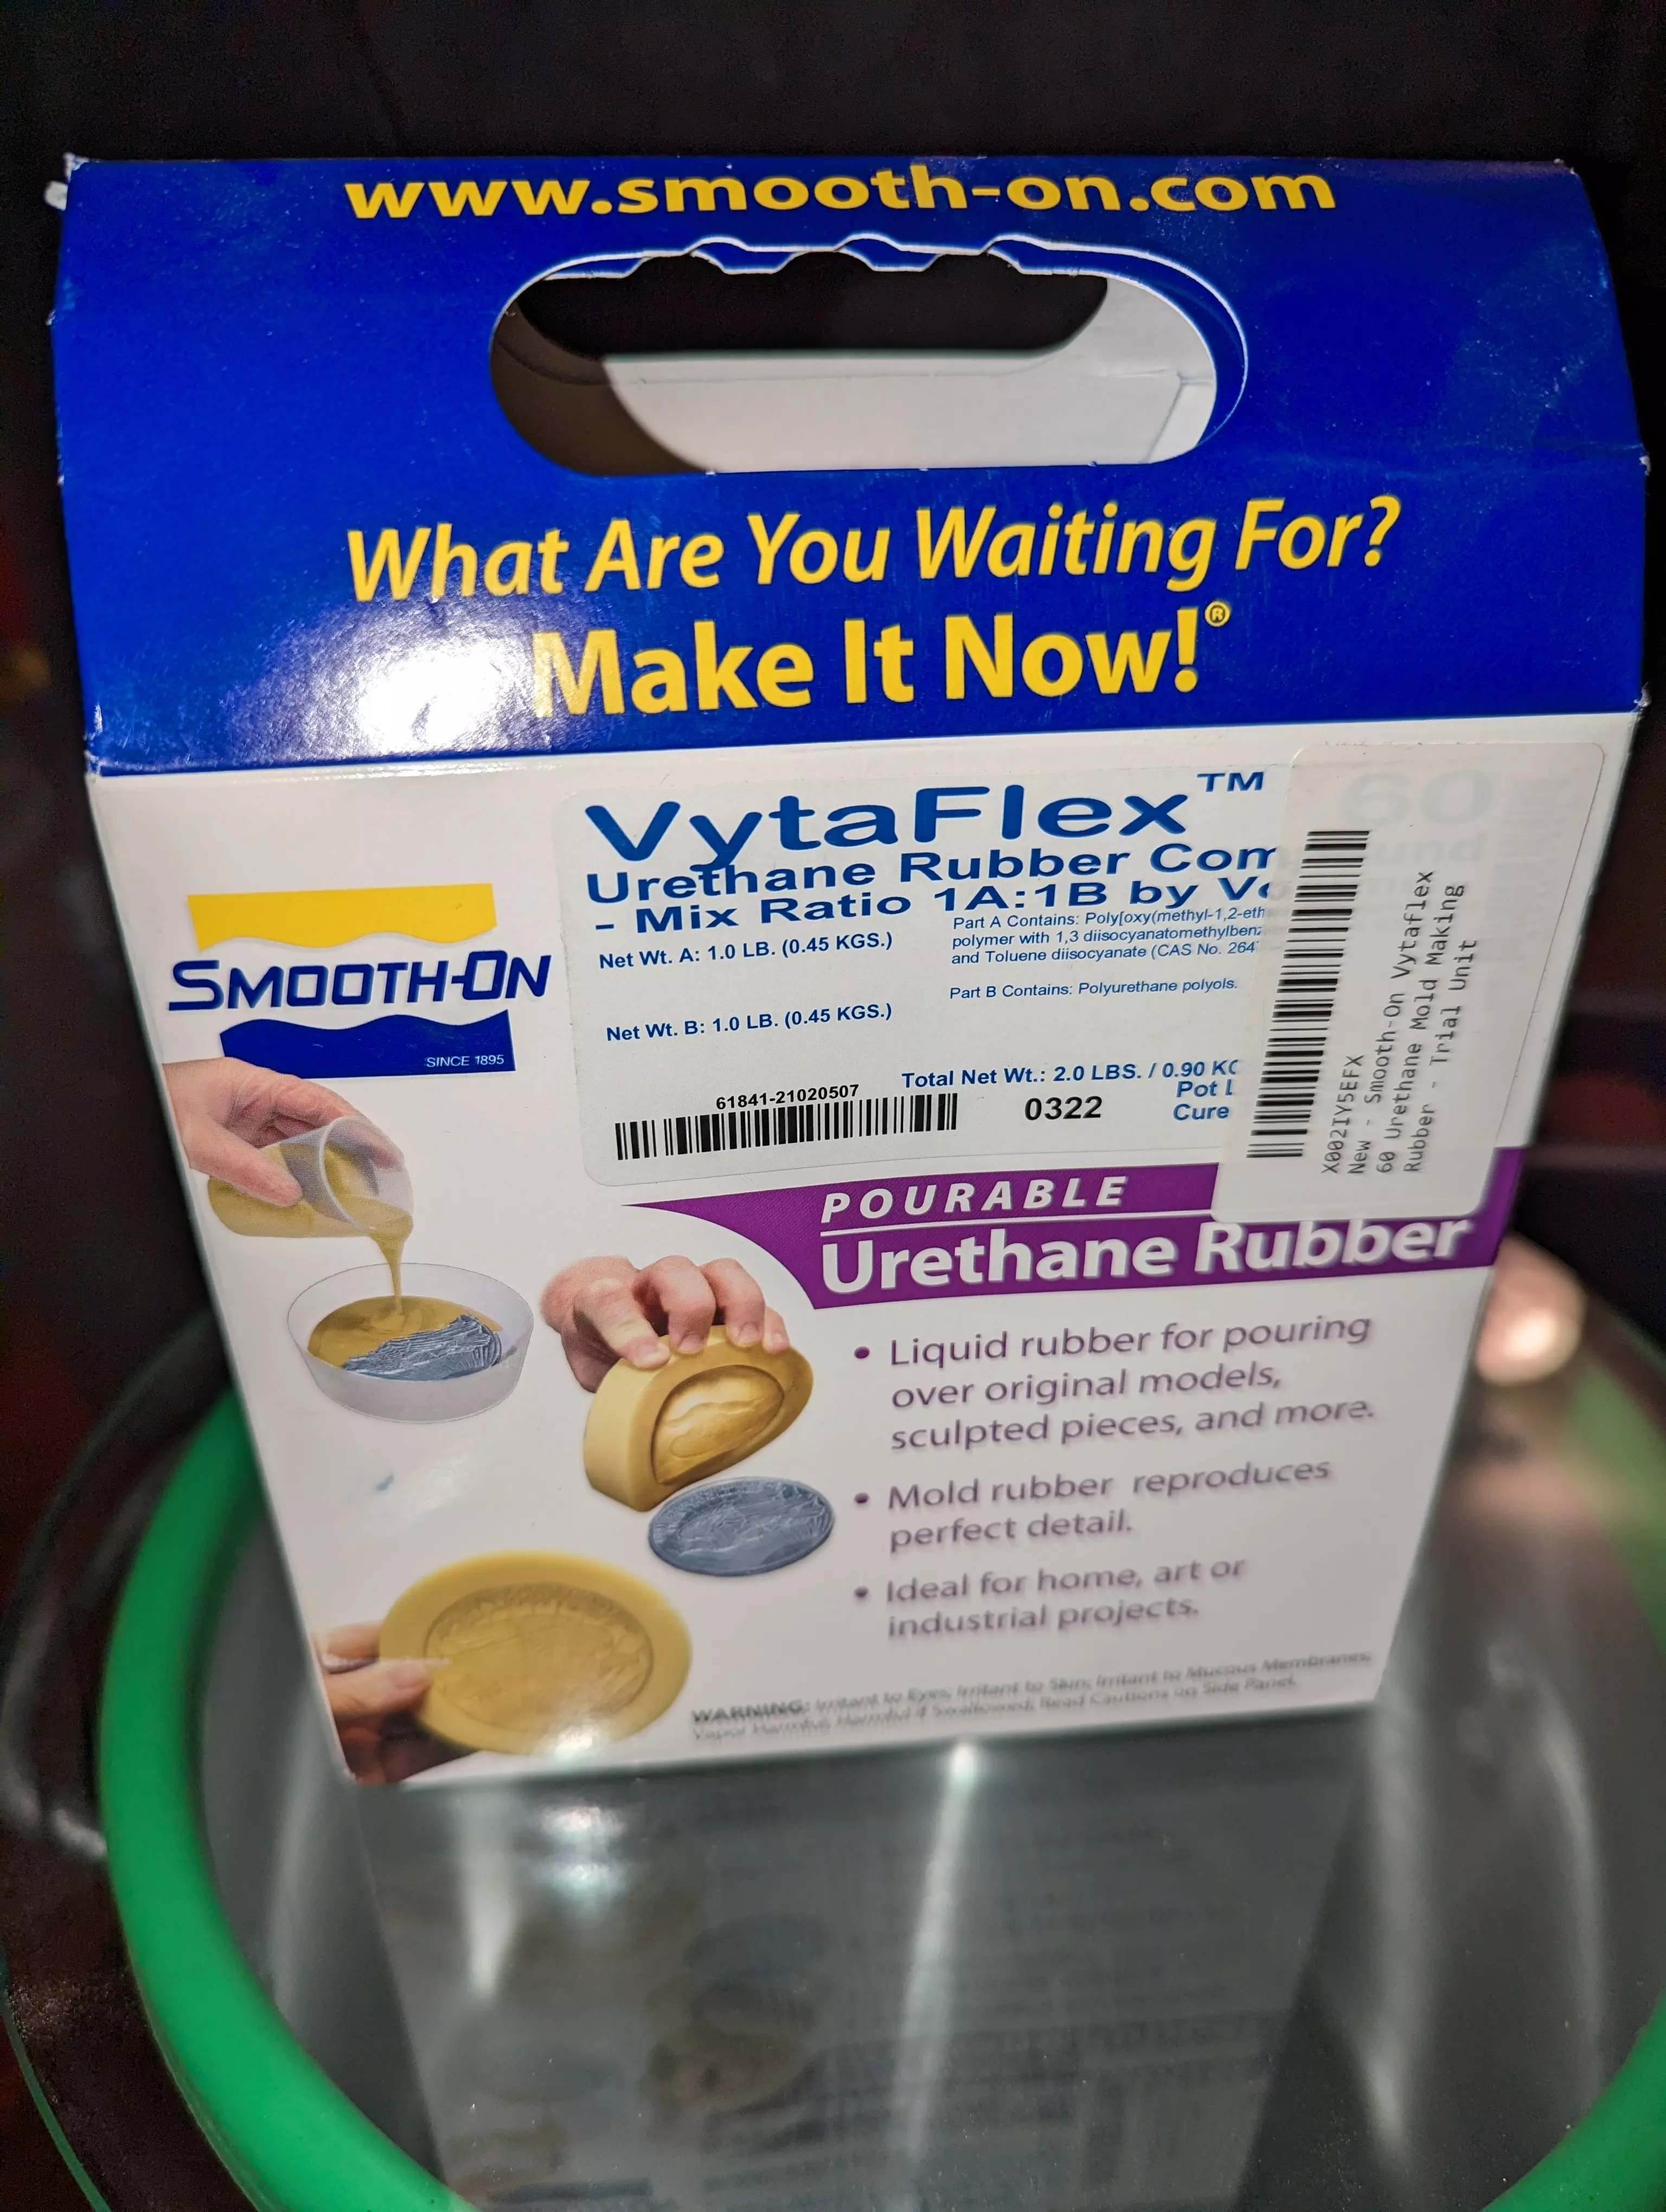 A Smooth-On kit box, view from the front